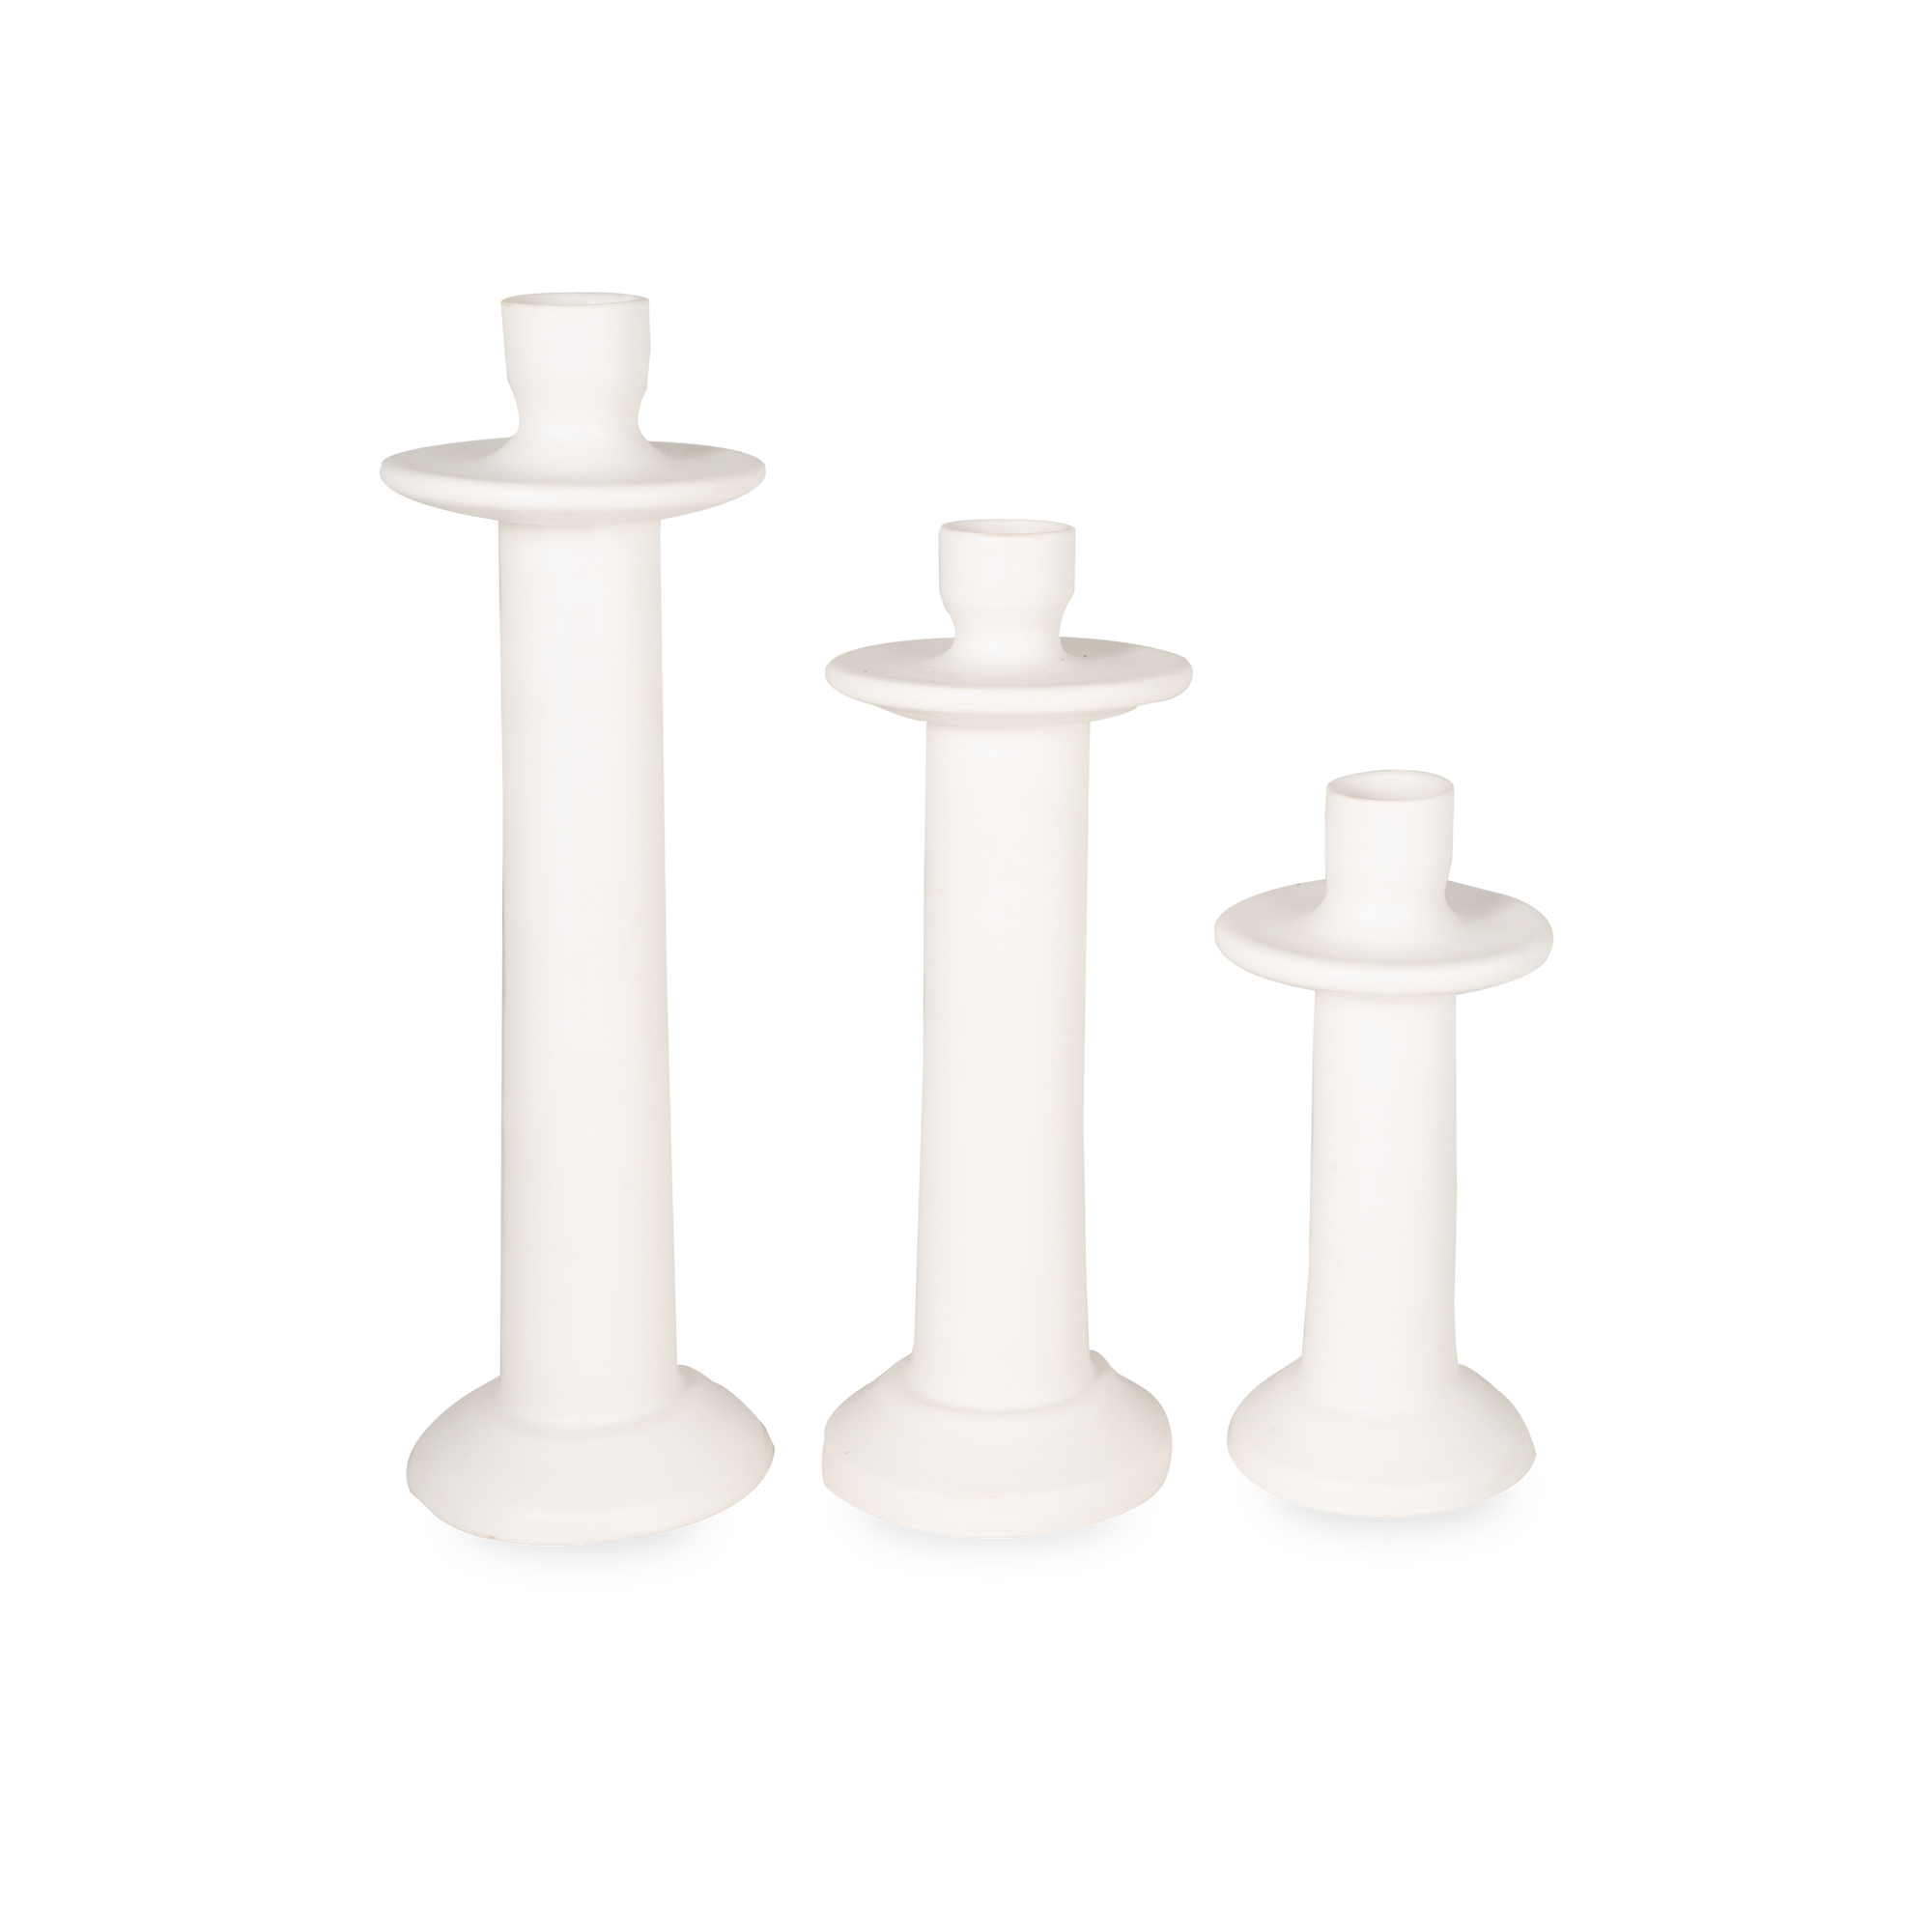 A beautiful combination of traditional craft and comtemporary style, these Ceramic Candleholders are crafted by hand and come in three different sizes.